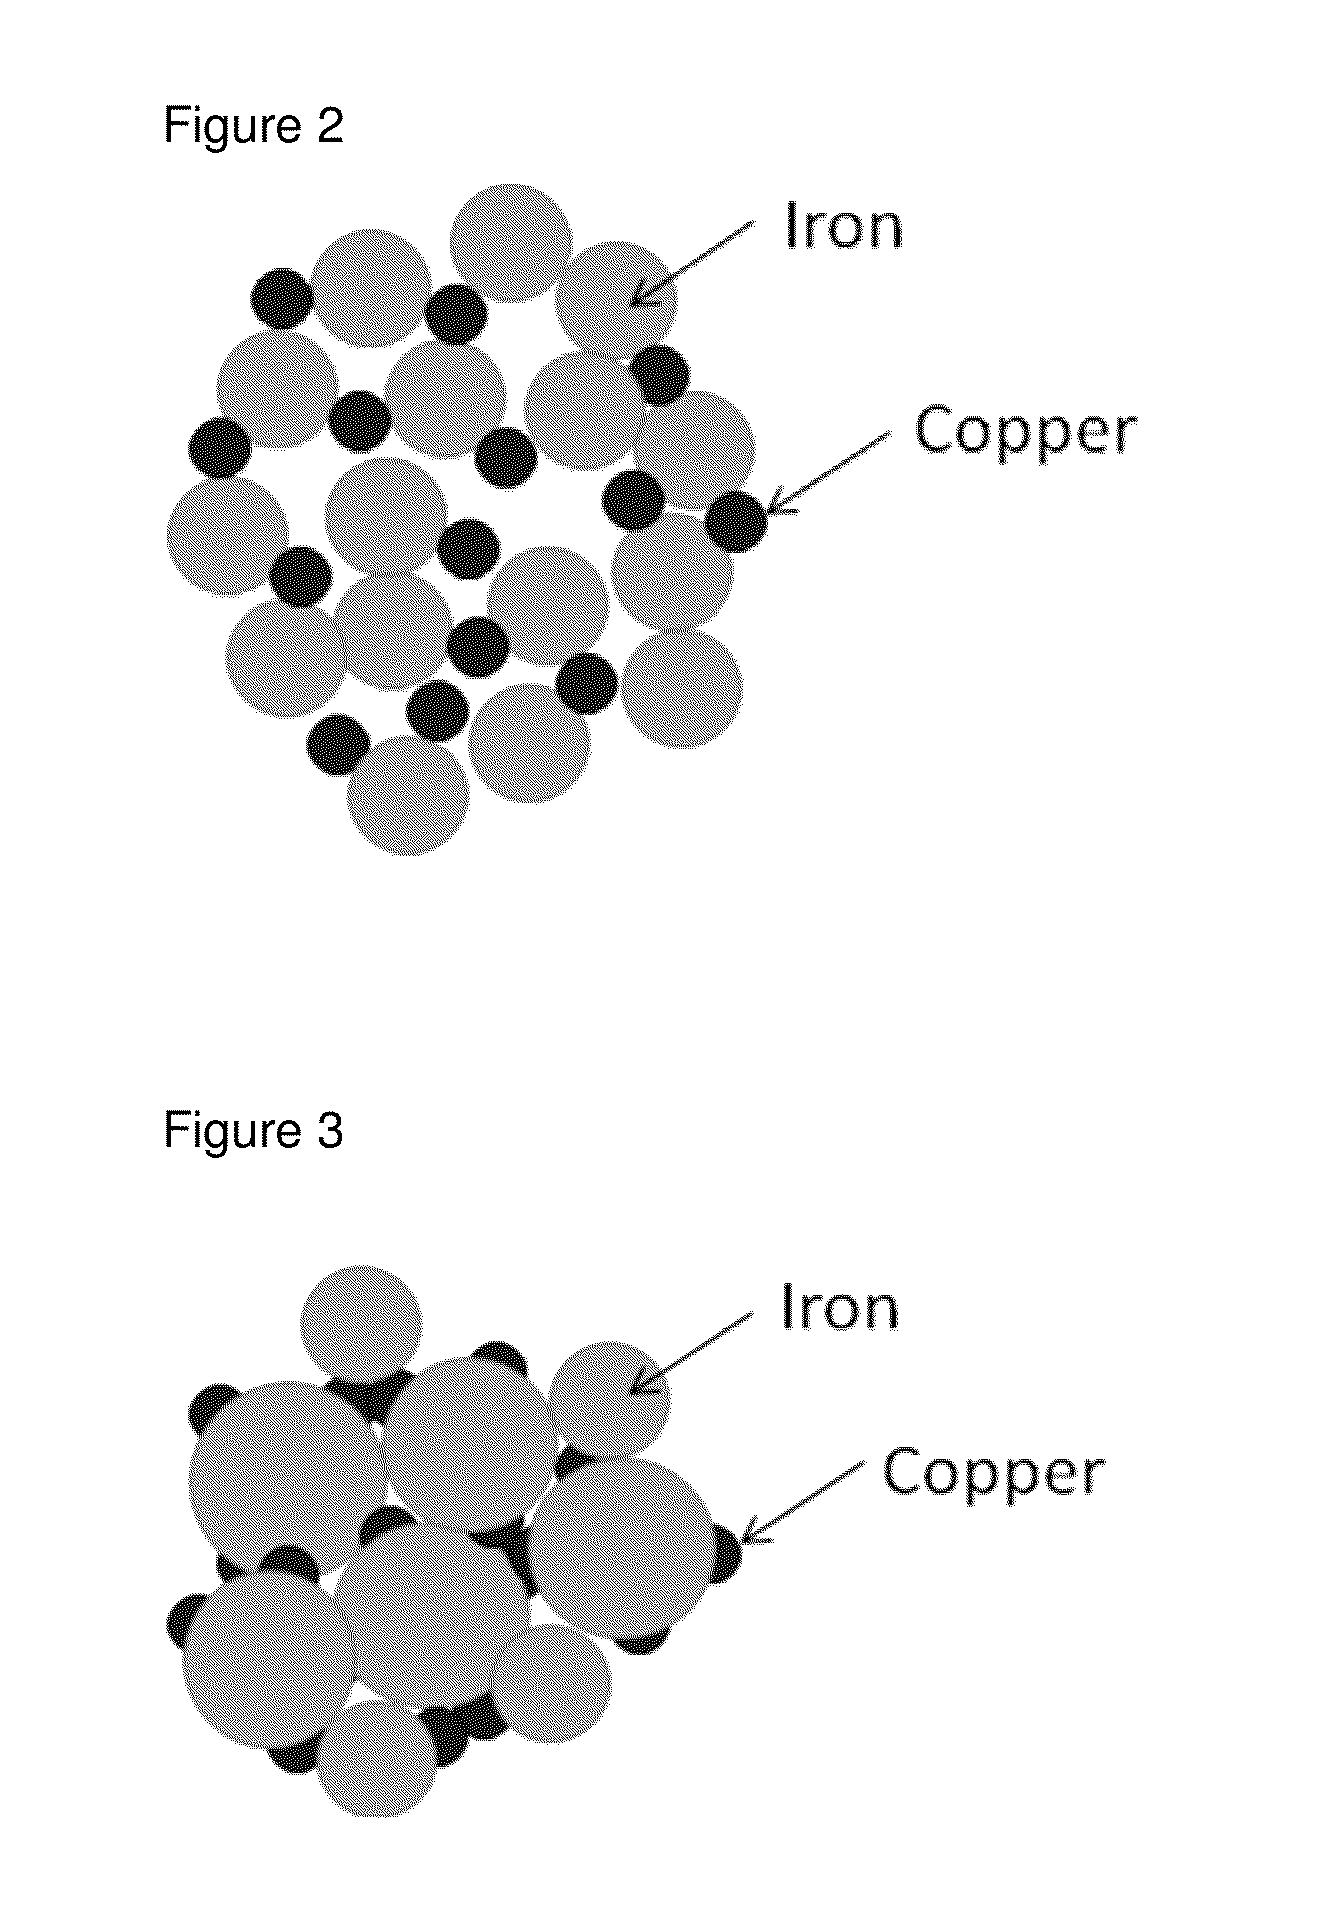 Iron copper compositions for fluid purification